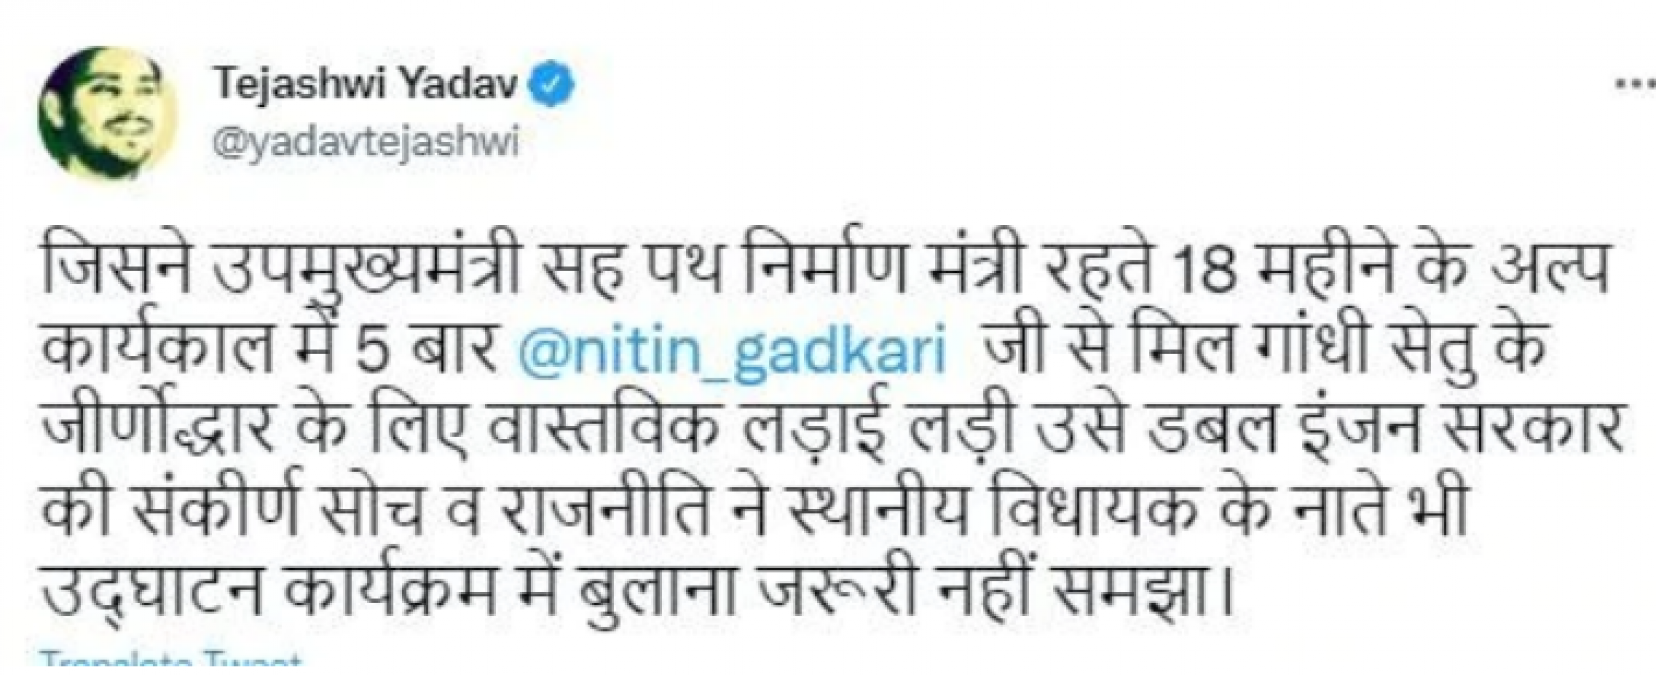 Tejashwi did not get the invitation to the inauguration of Gandhi Setu, he said this is a big deal.